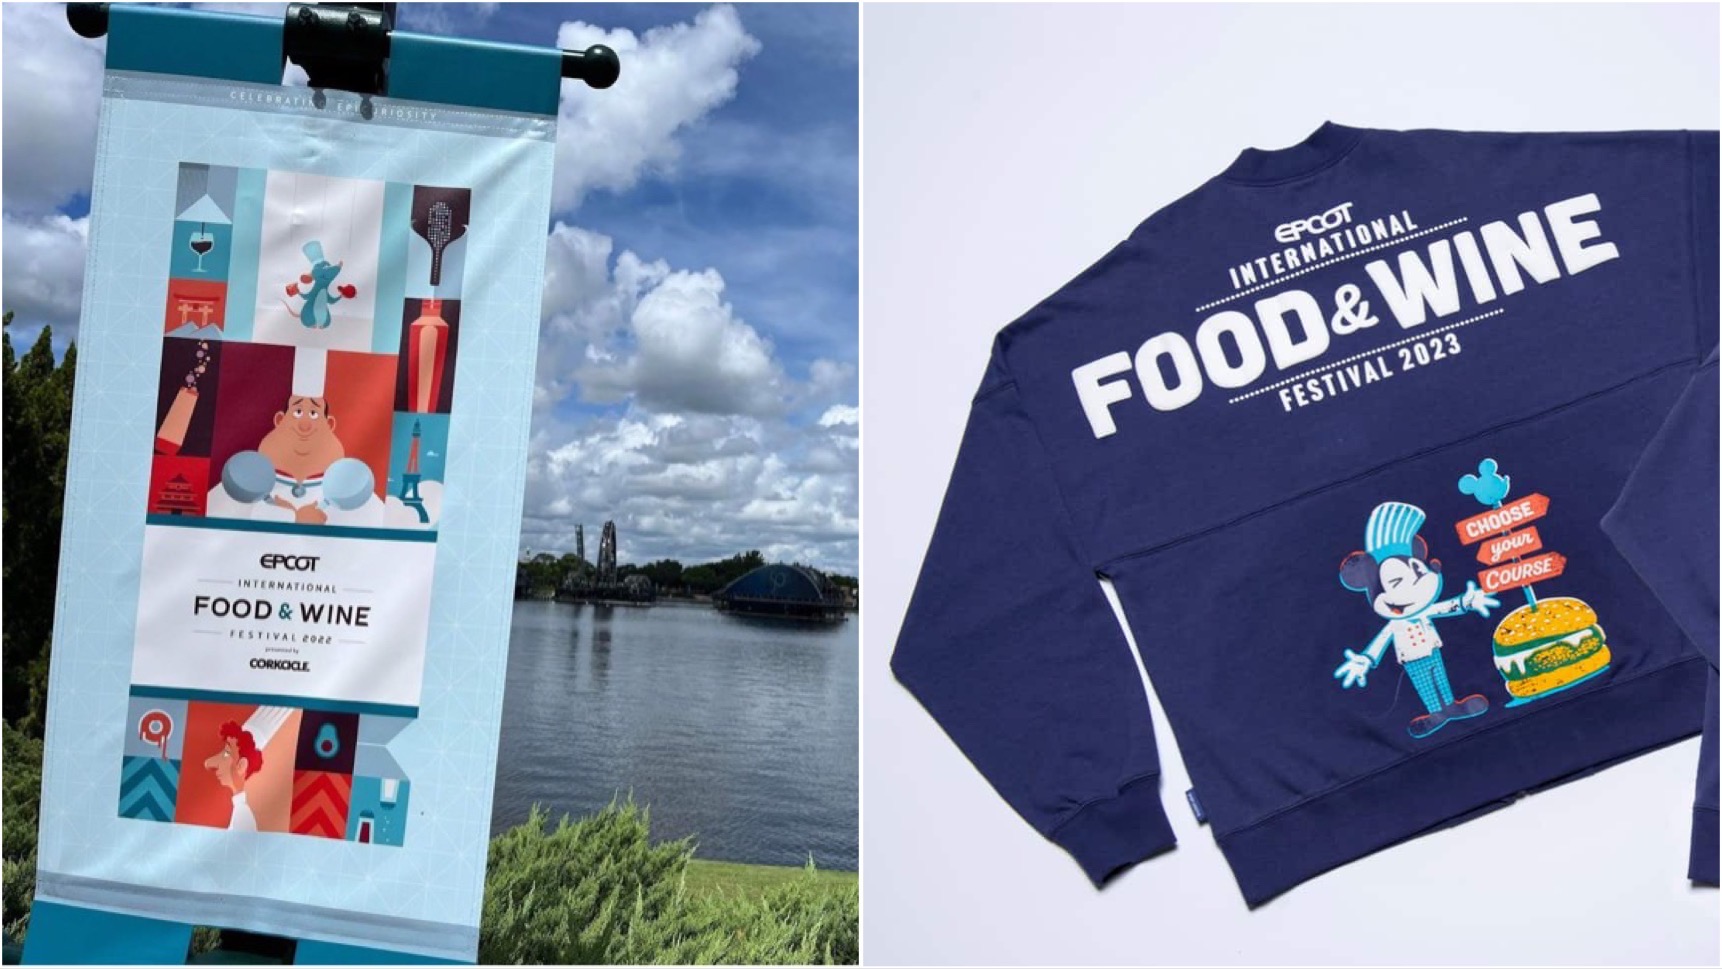 Get A Sneak Peek At The Exciting New Epcot Food And Wine Festival Merchandise!